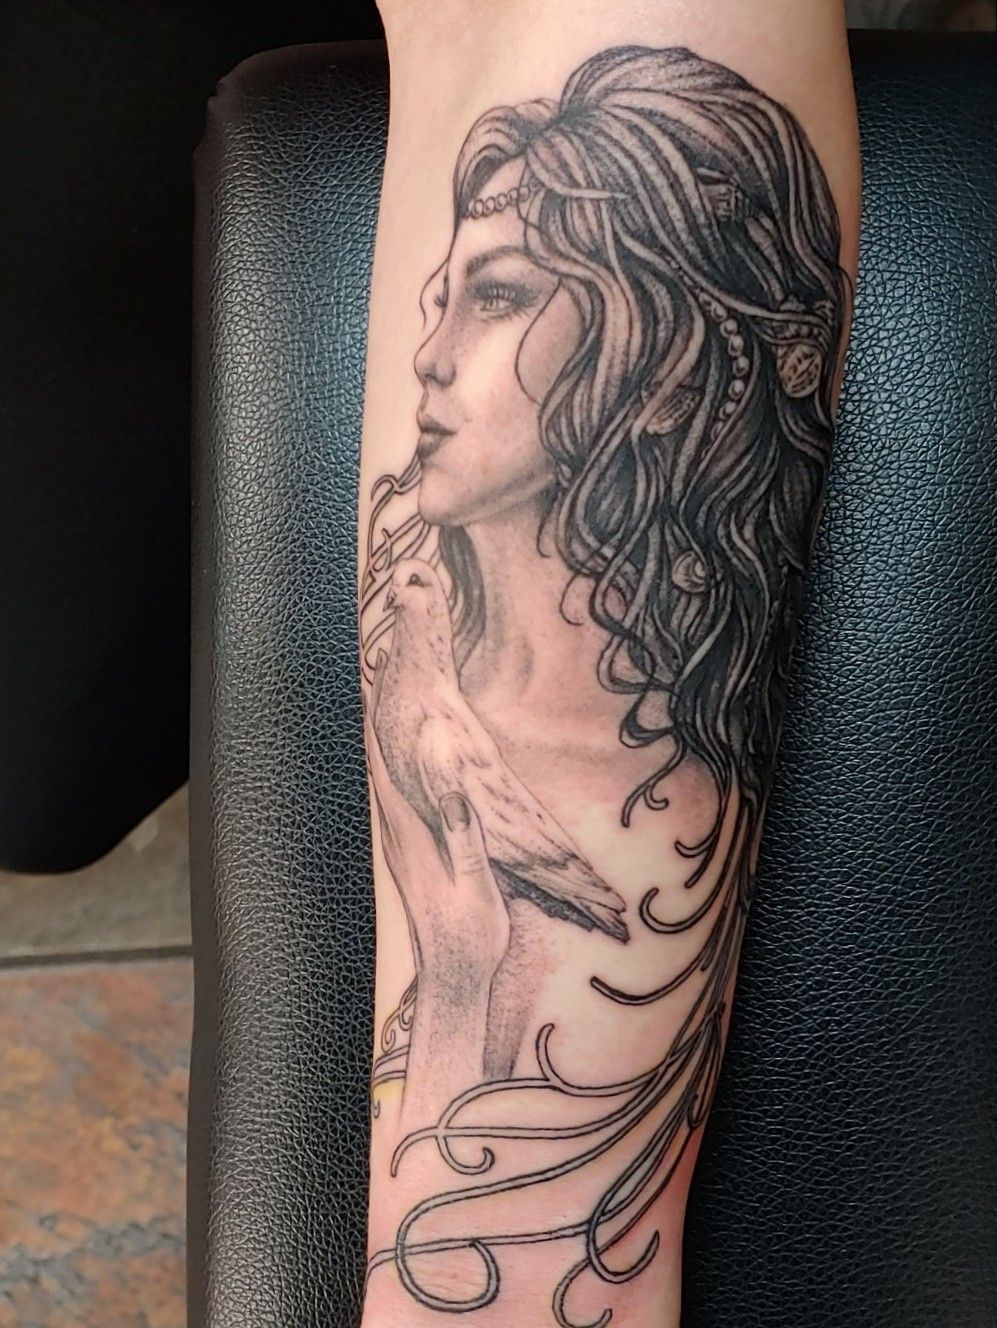 Why I Got a Tattoo of Aphrodite  The Rebel Chick